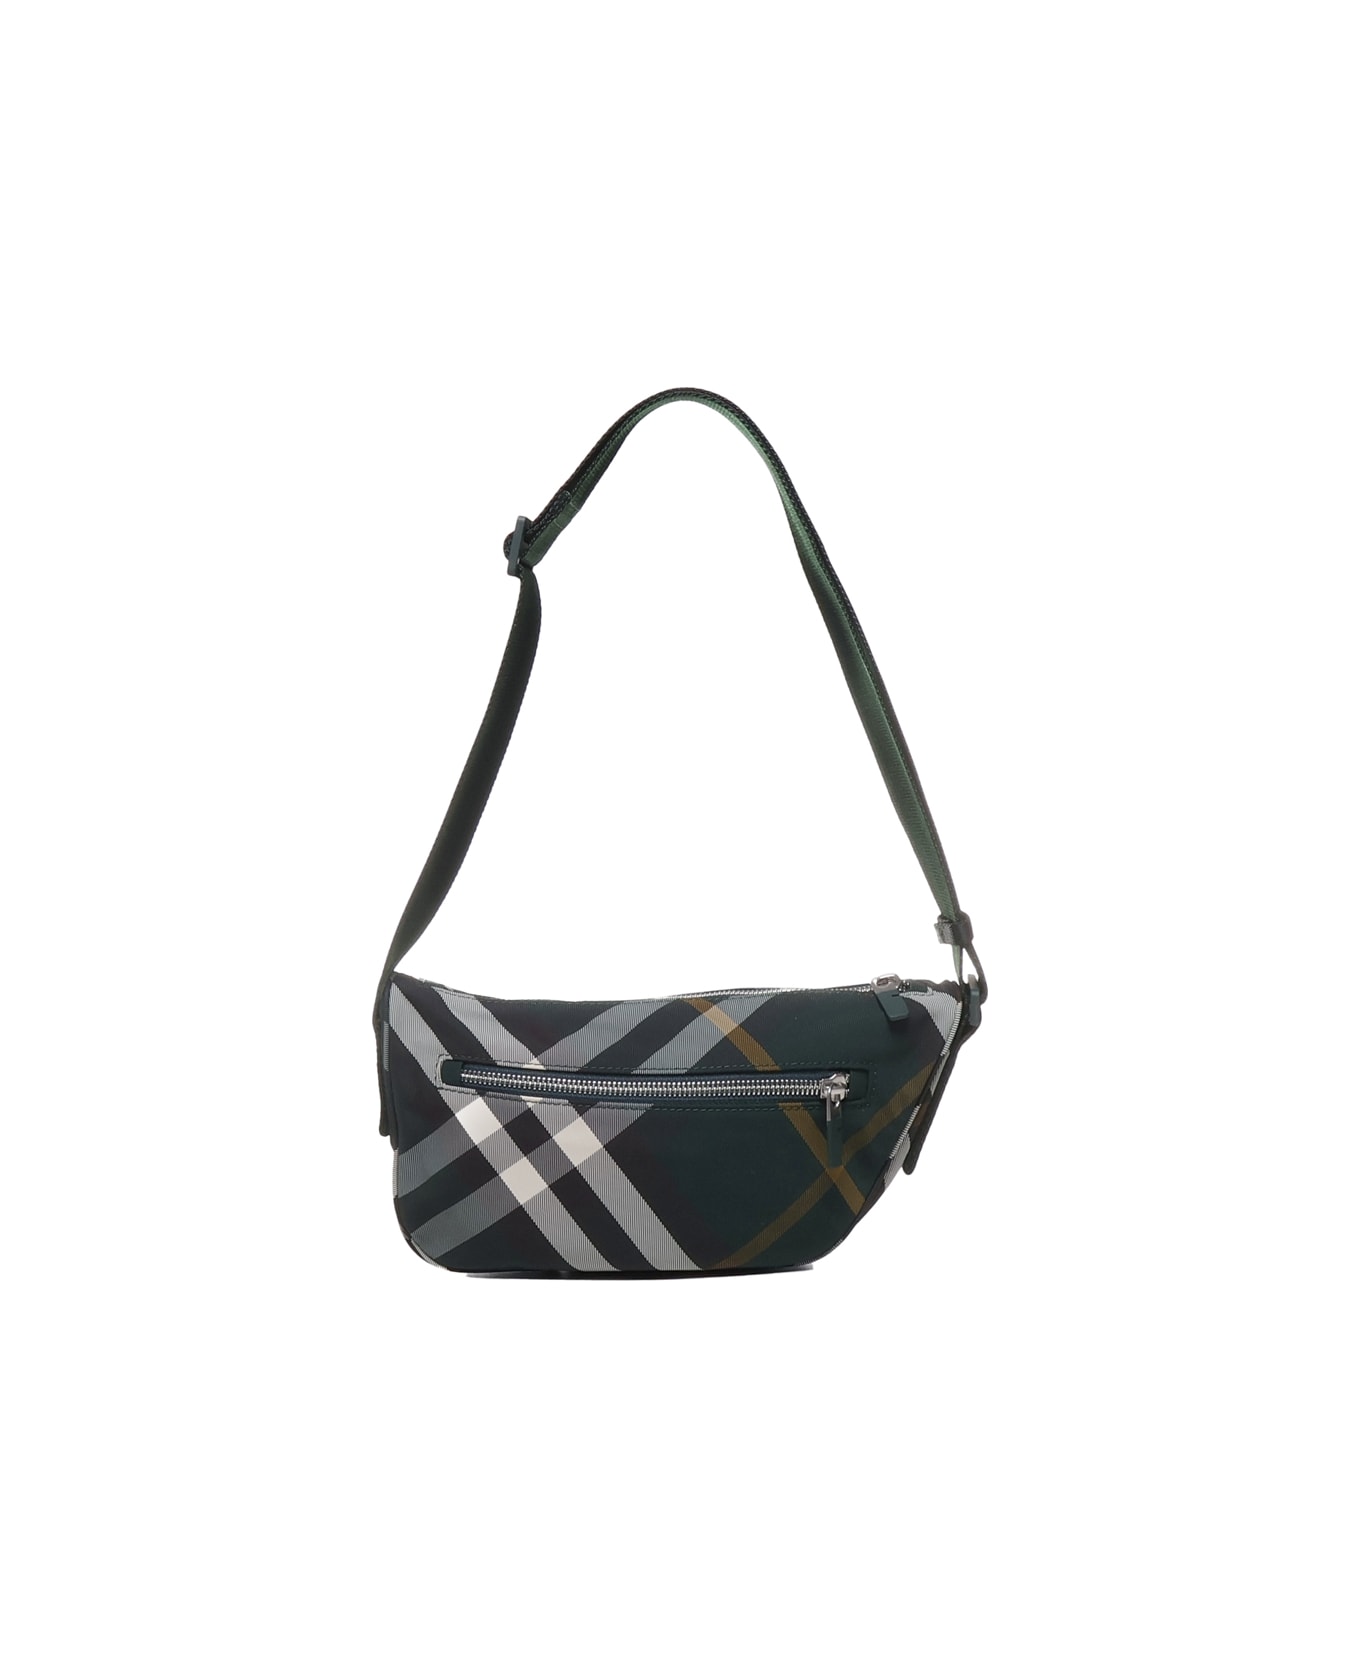 Burberry Check Pouch Bag - Ivy